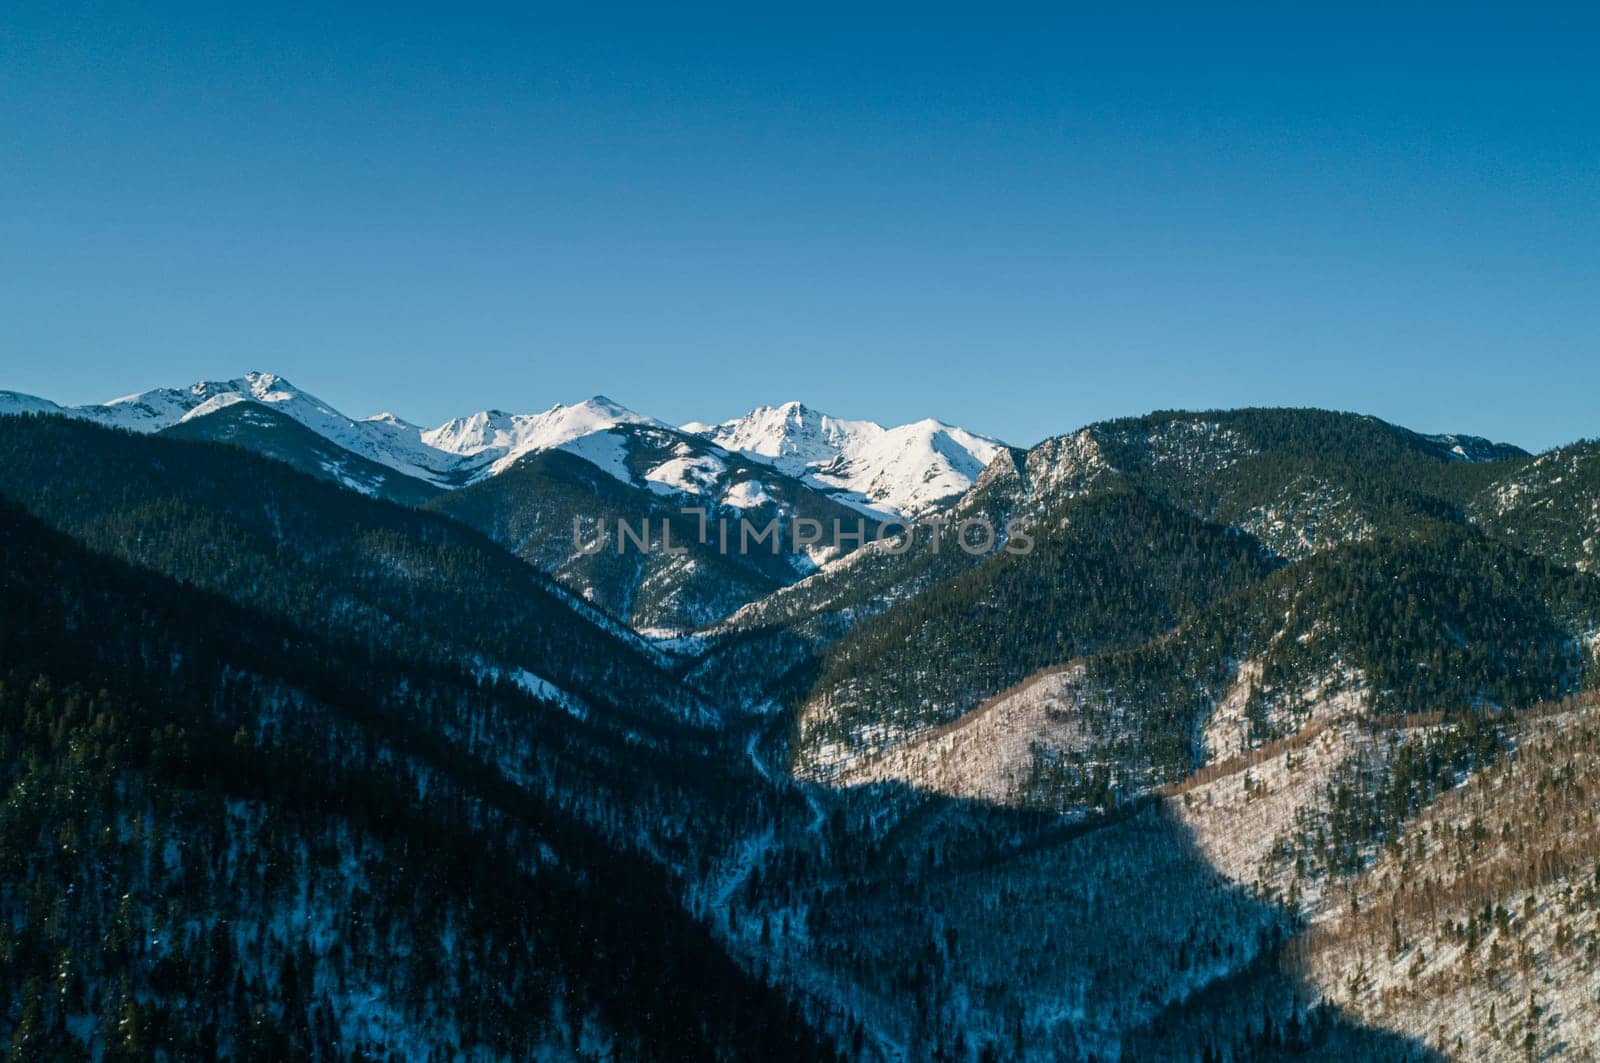 Aerial landscape mountains covered with forest and snow-capped peaks in the background. Cinematic winter mountains landscape